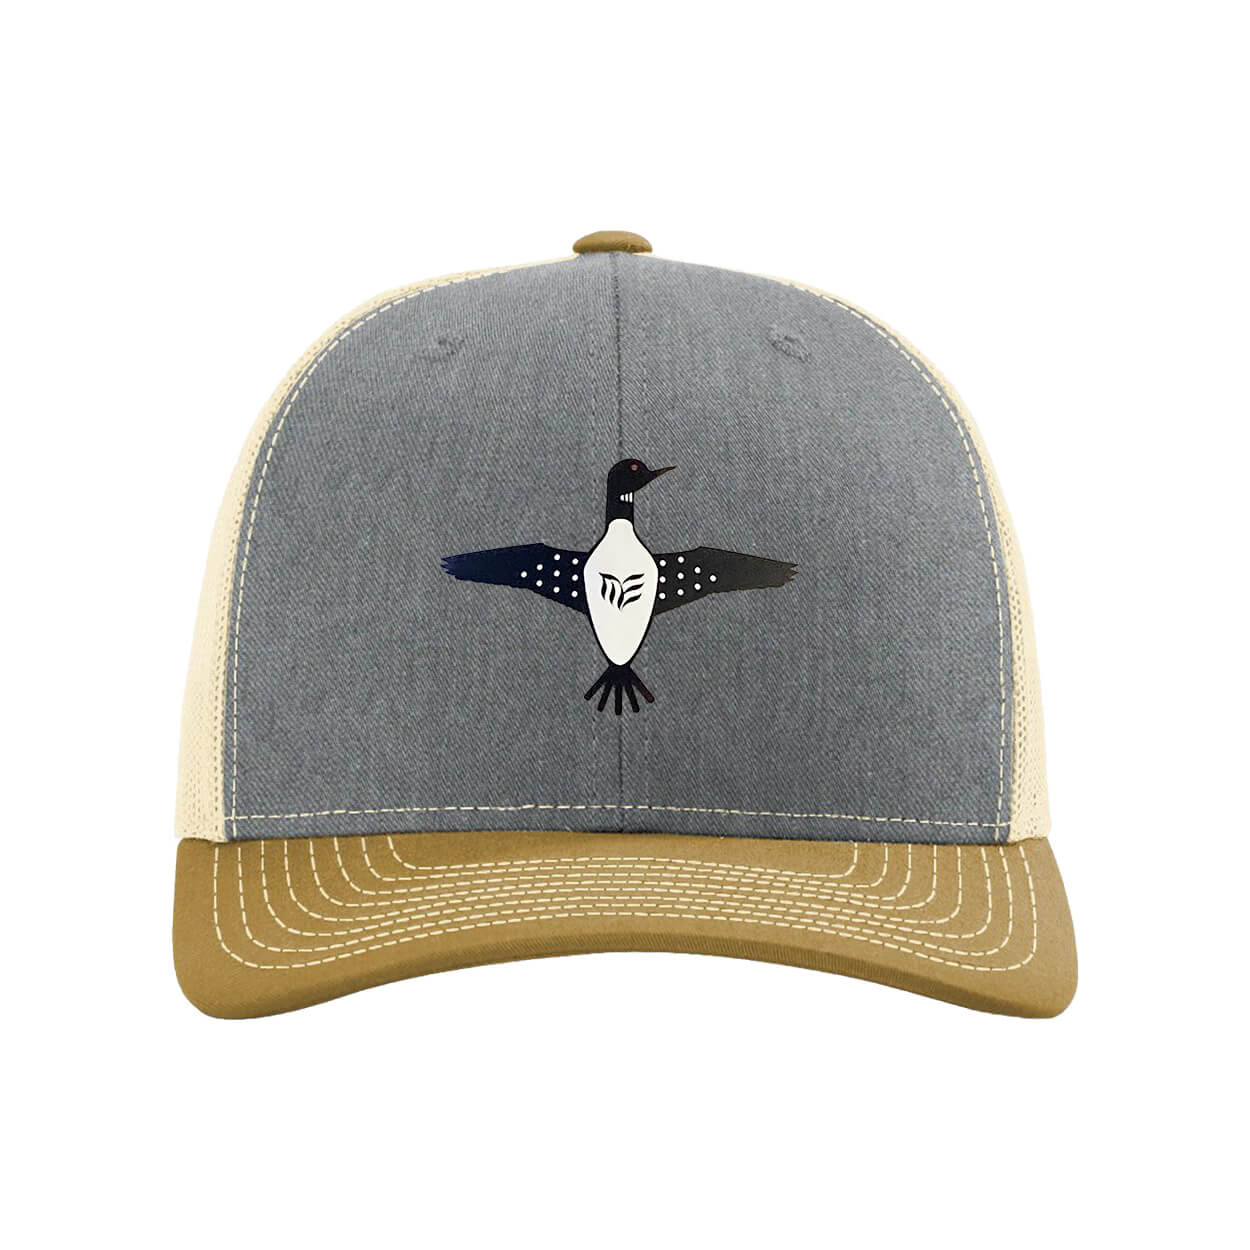 Modern Envy Loon logo on Richardson 112 hat in Grey, Birth and Amber front view